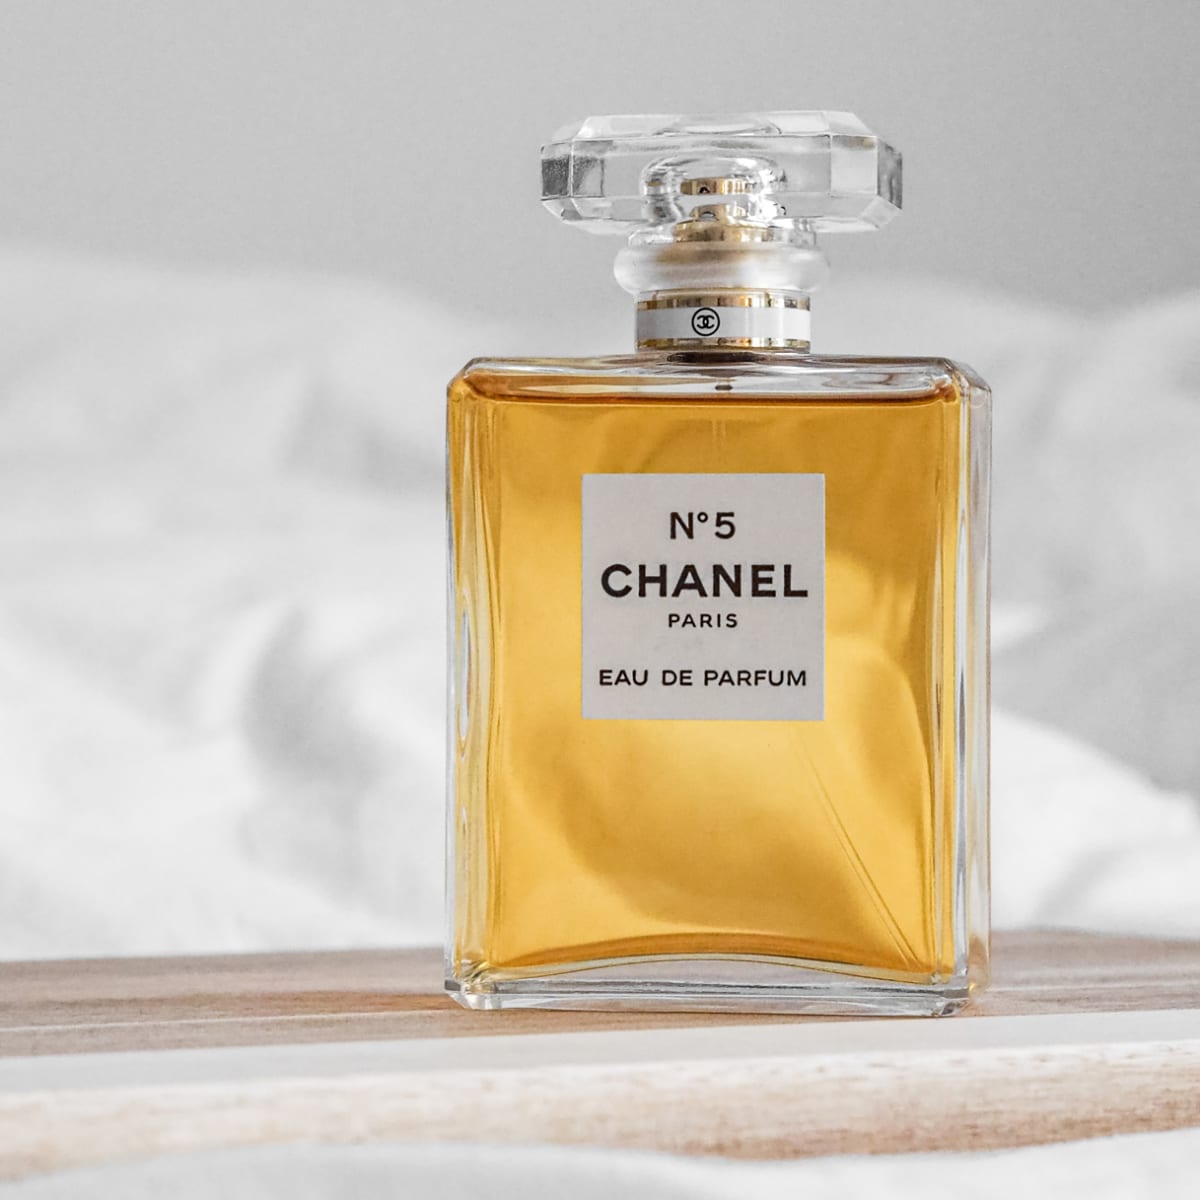 Chanel N° 5 Turns 100 Years Old: Here's Why The Number 5 Was